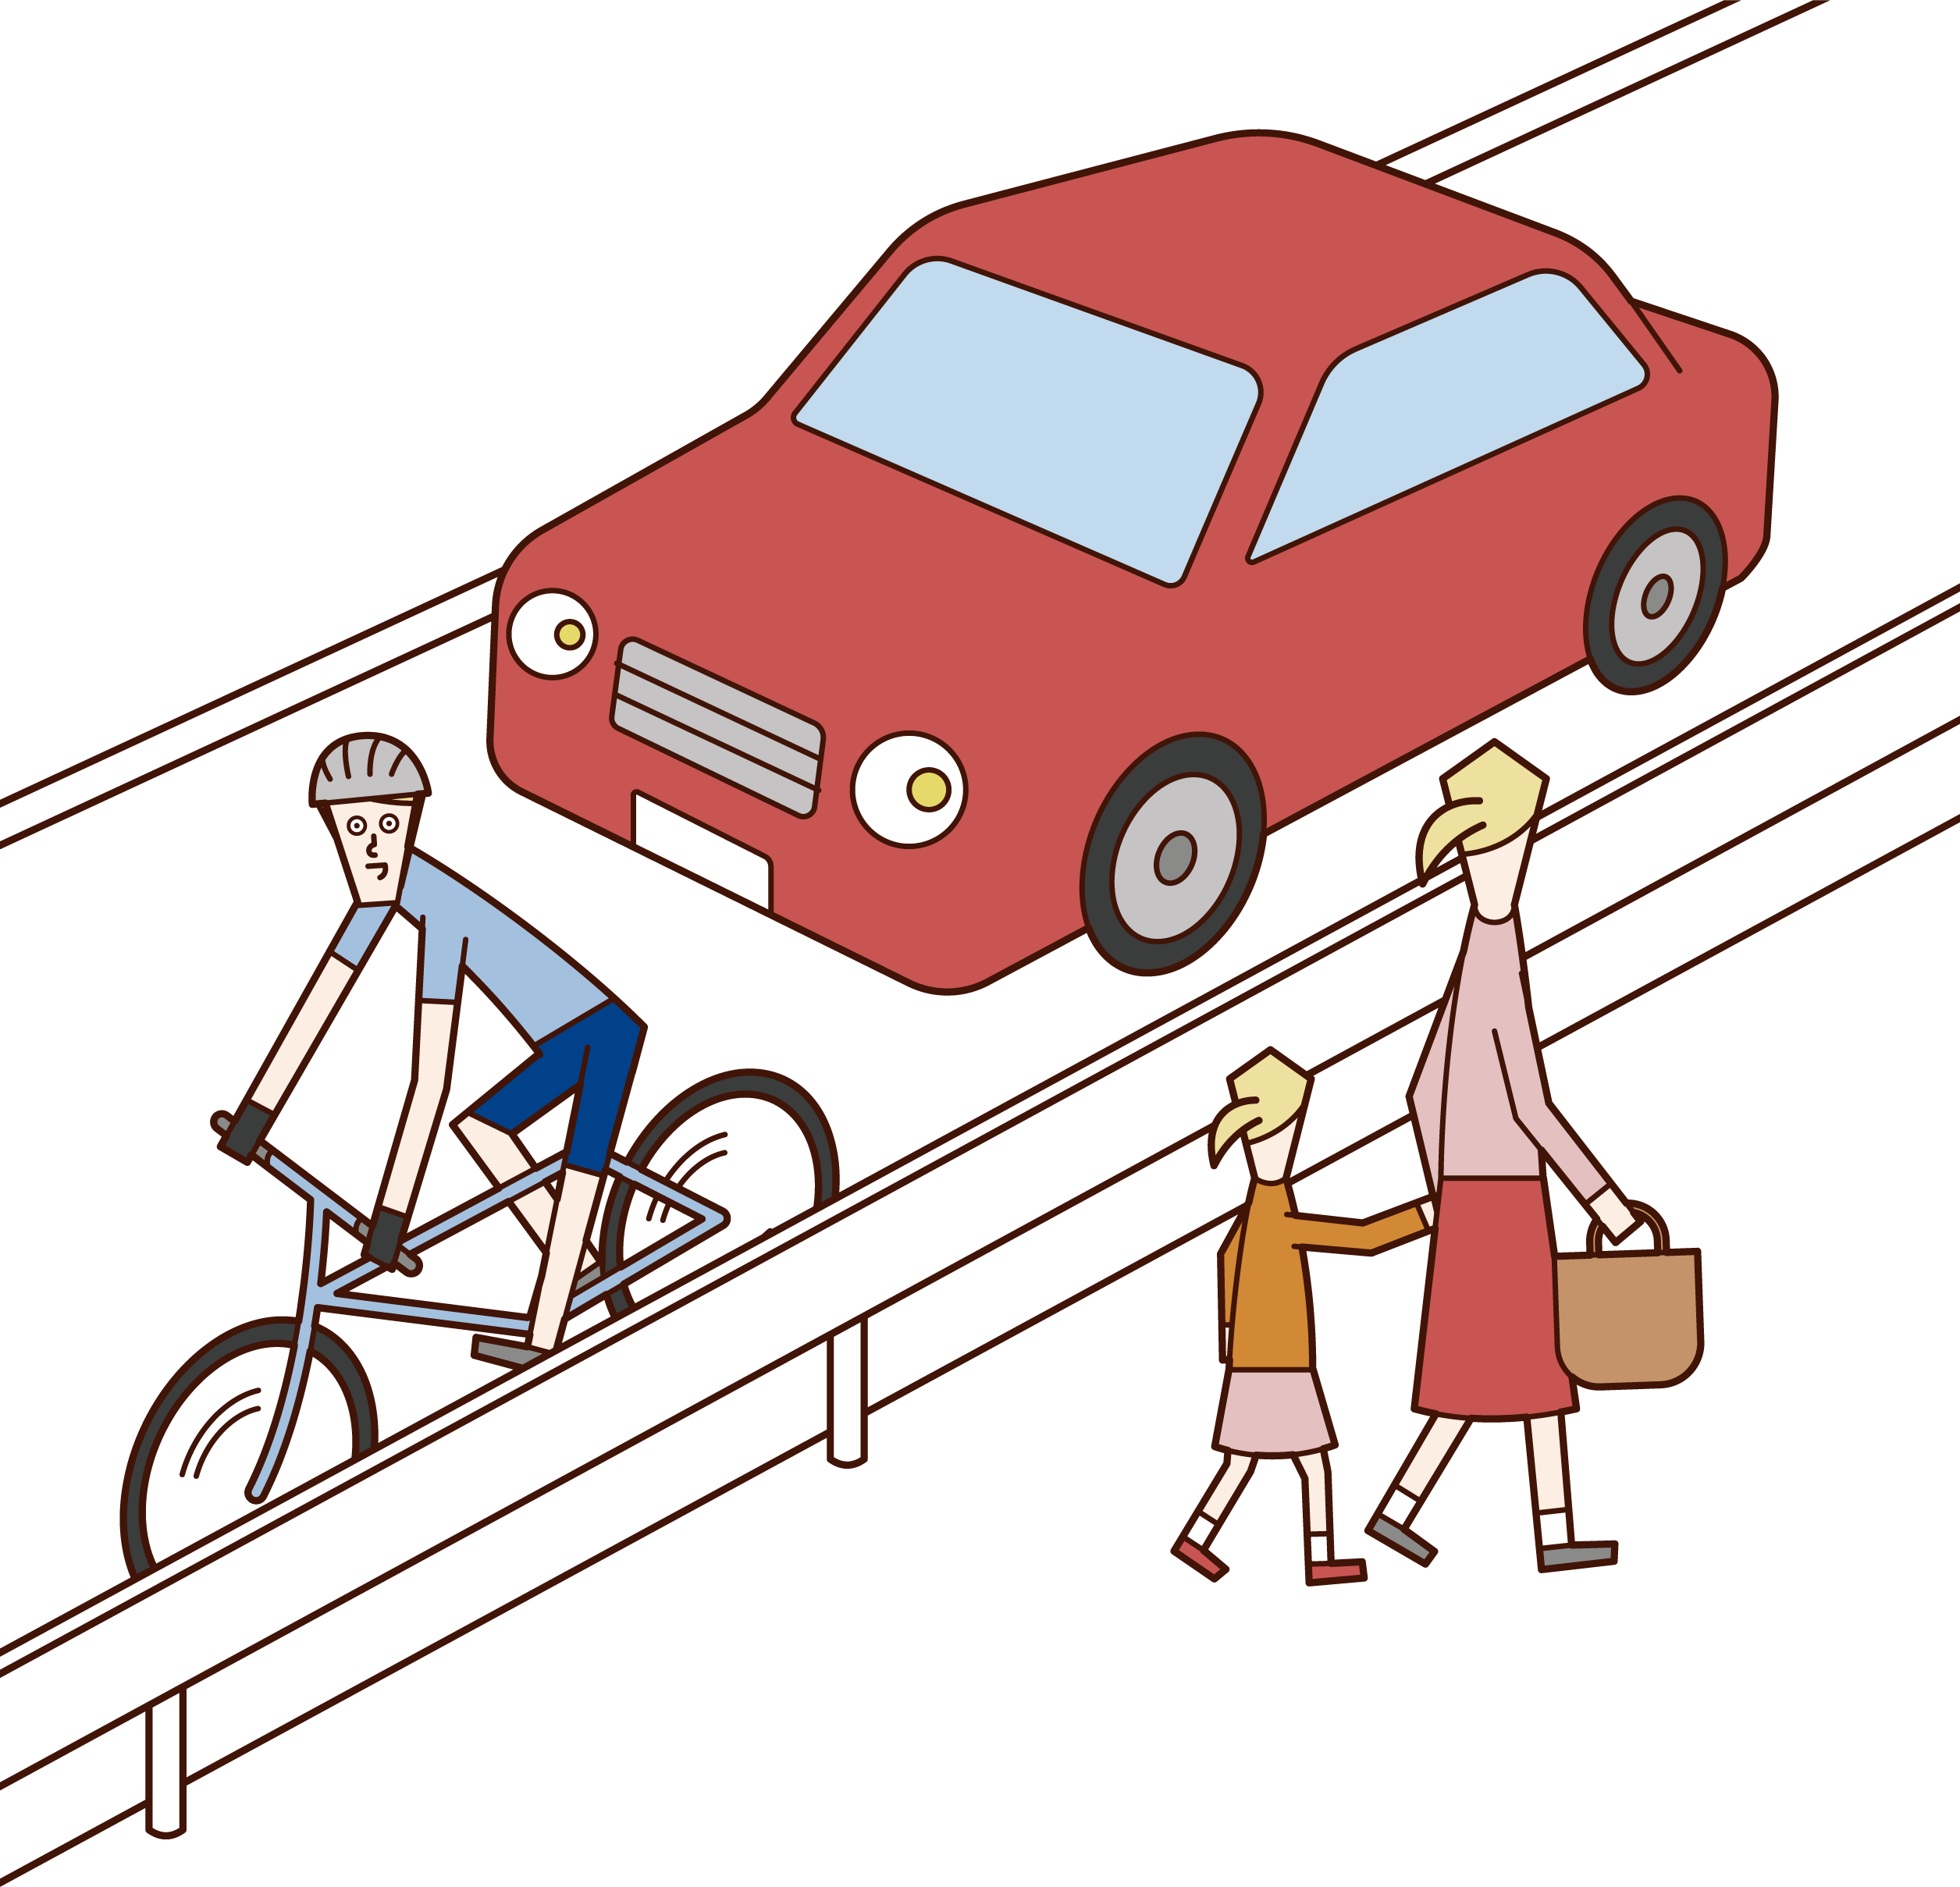 Illustration of a man riding on a bicycle on a driveway